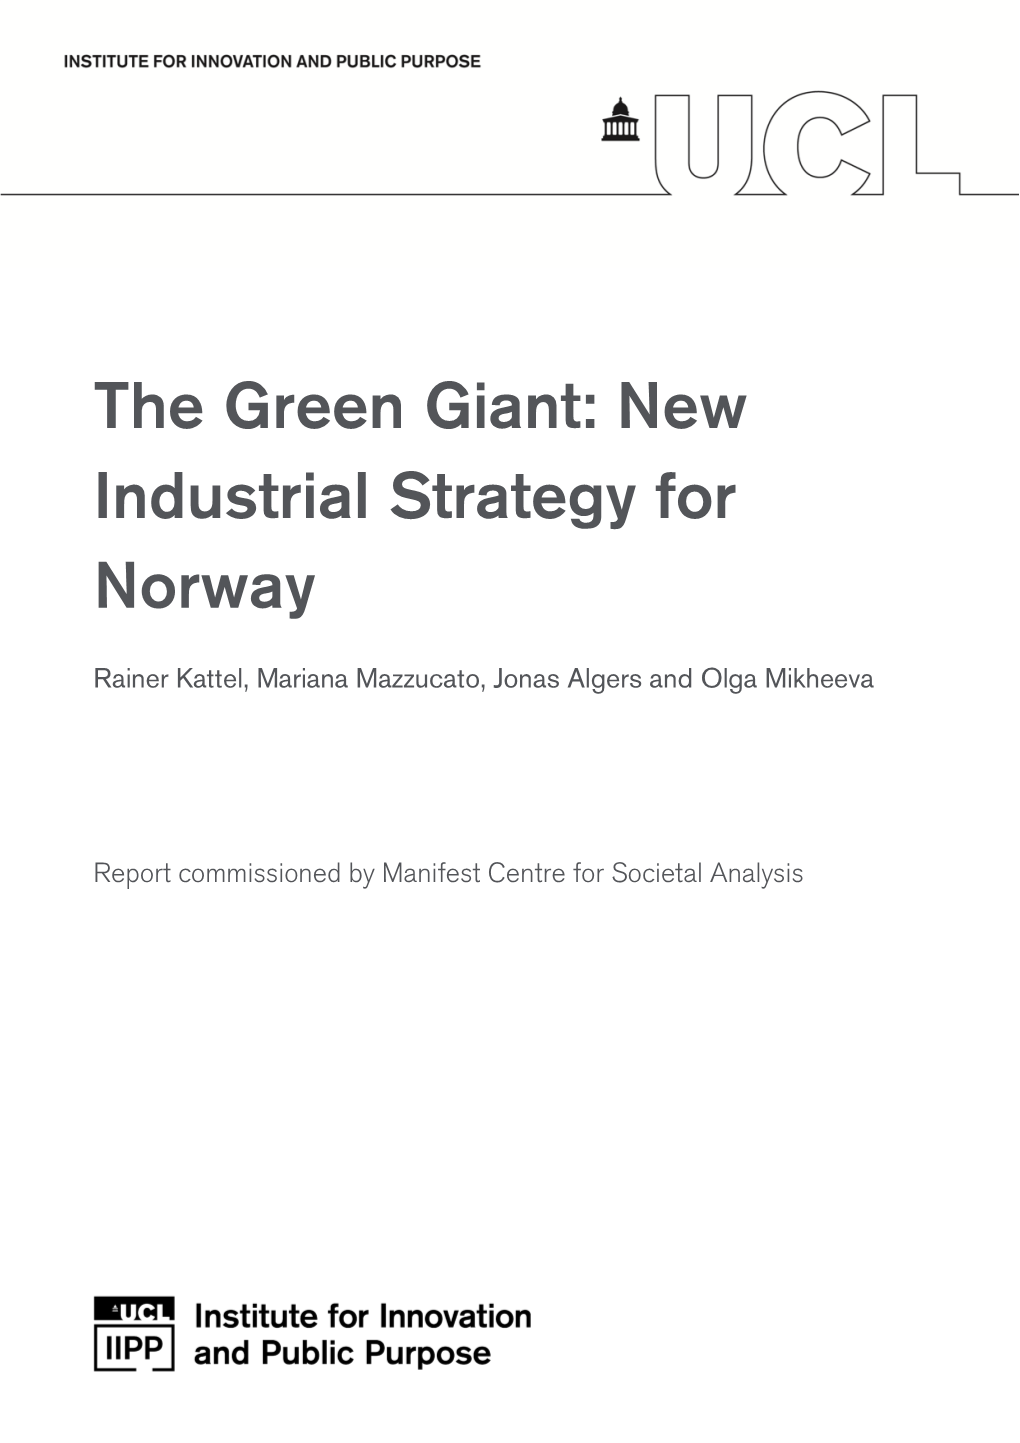 The Green Giant: New Industrial Strategy for Norway